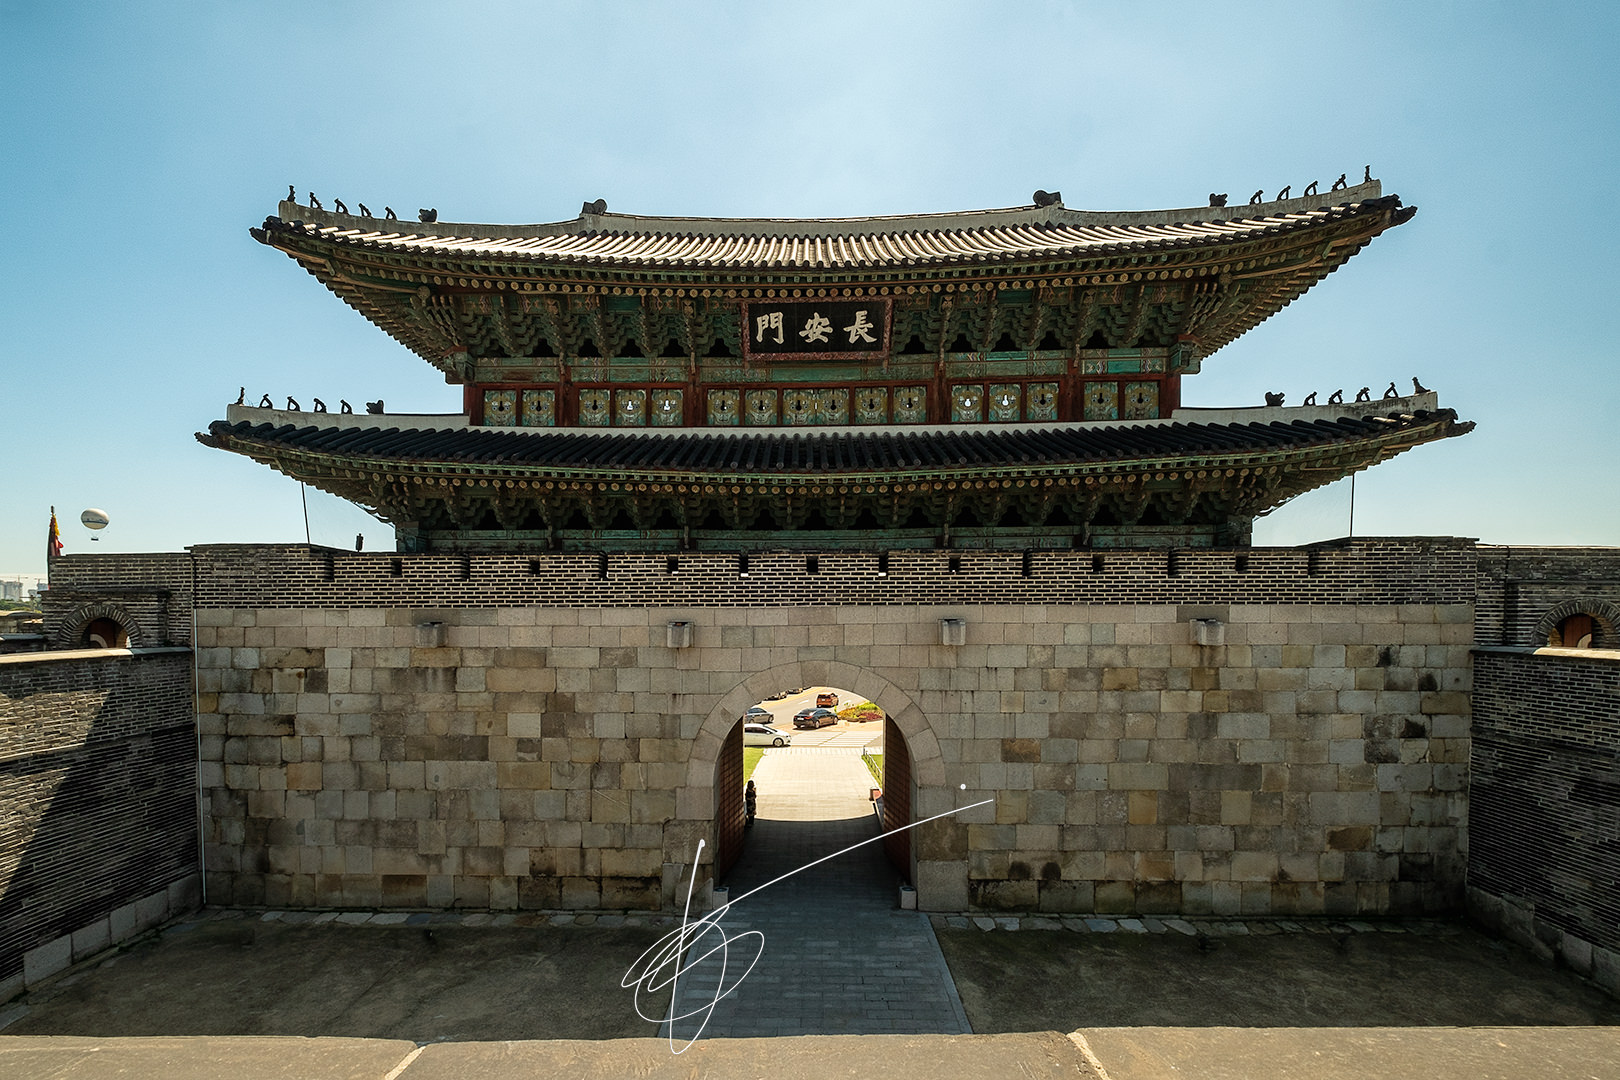 The north gate of Suwon fortress